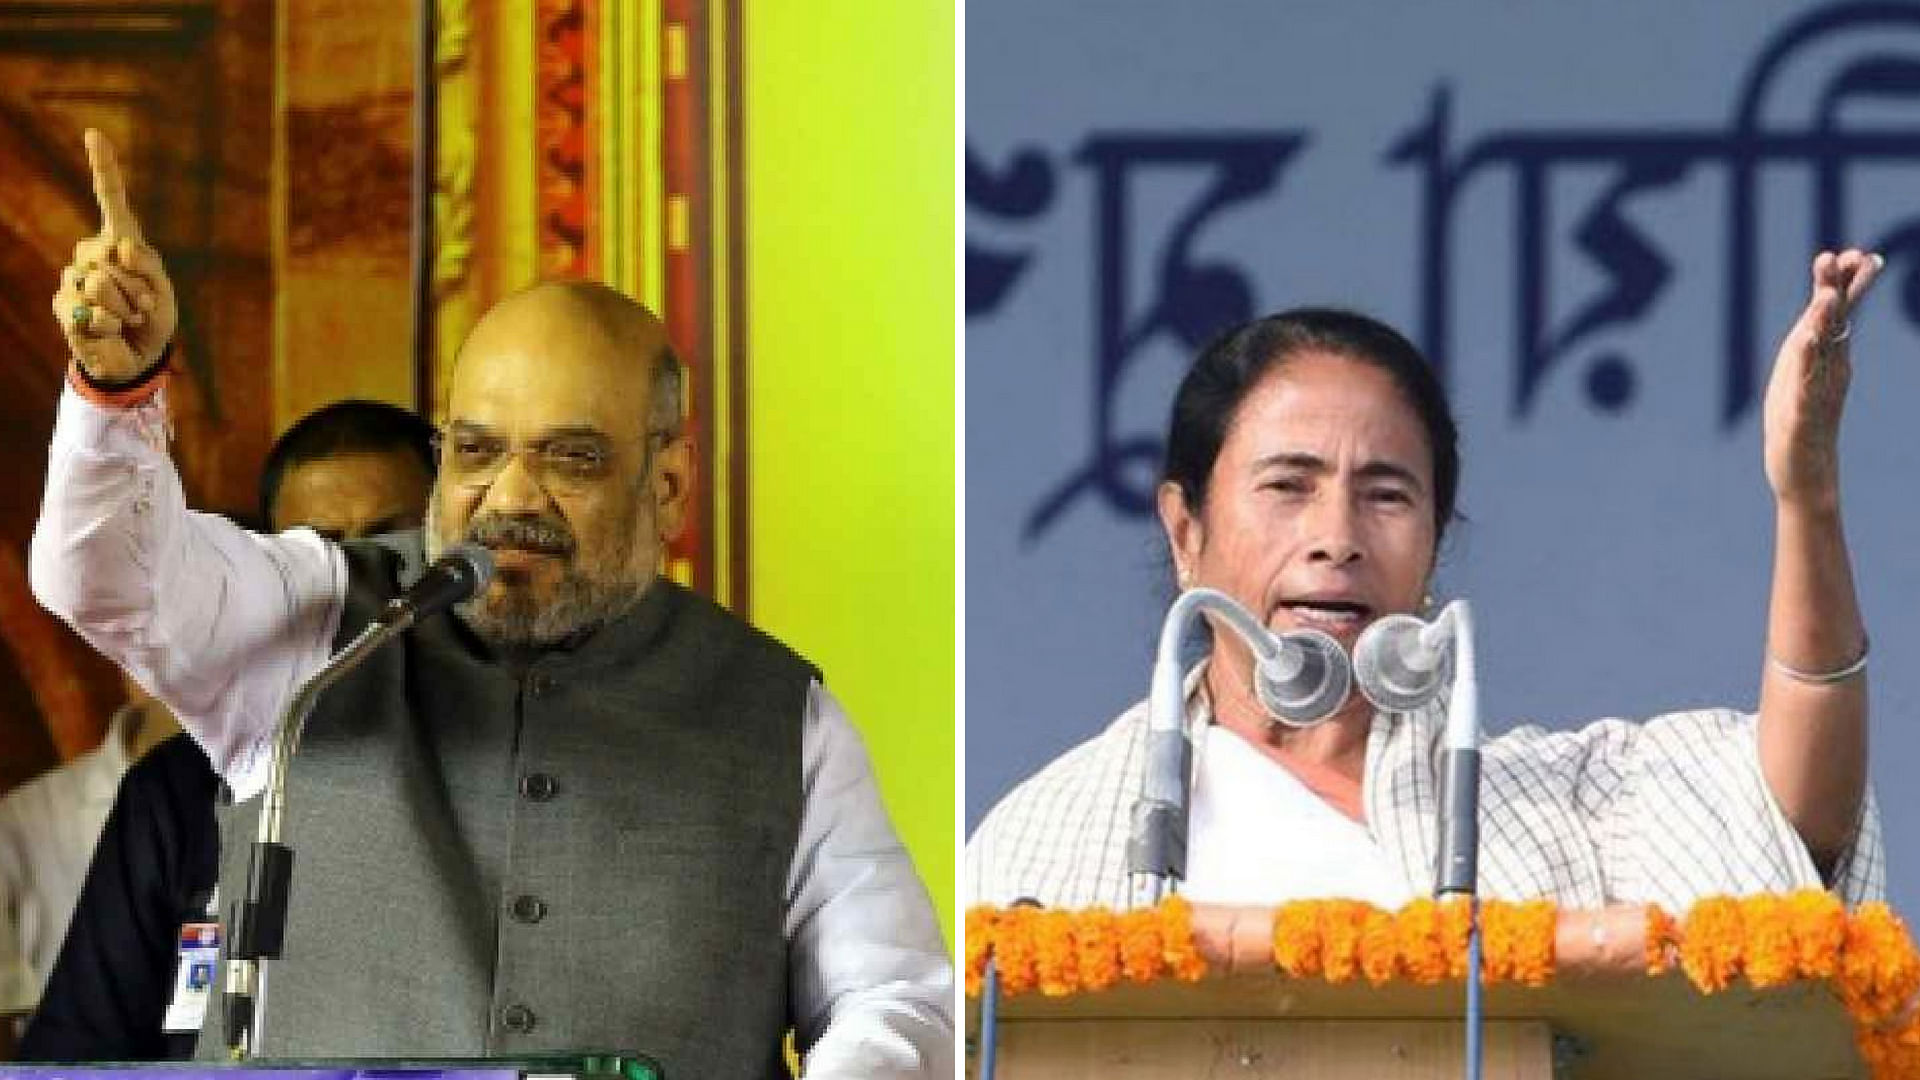 BJP chief Amit Shah and West Bengal Chief Minister Mamata Banerjee.